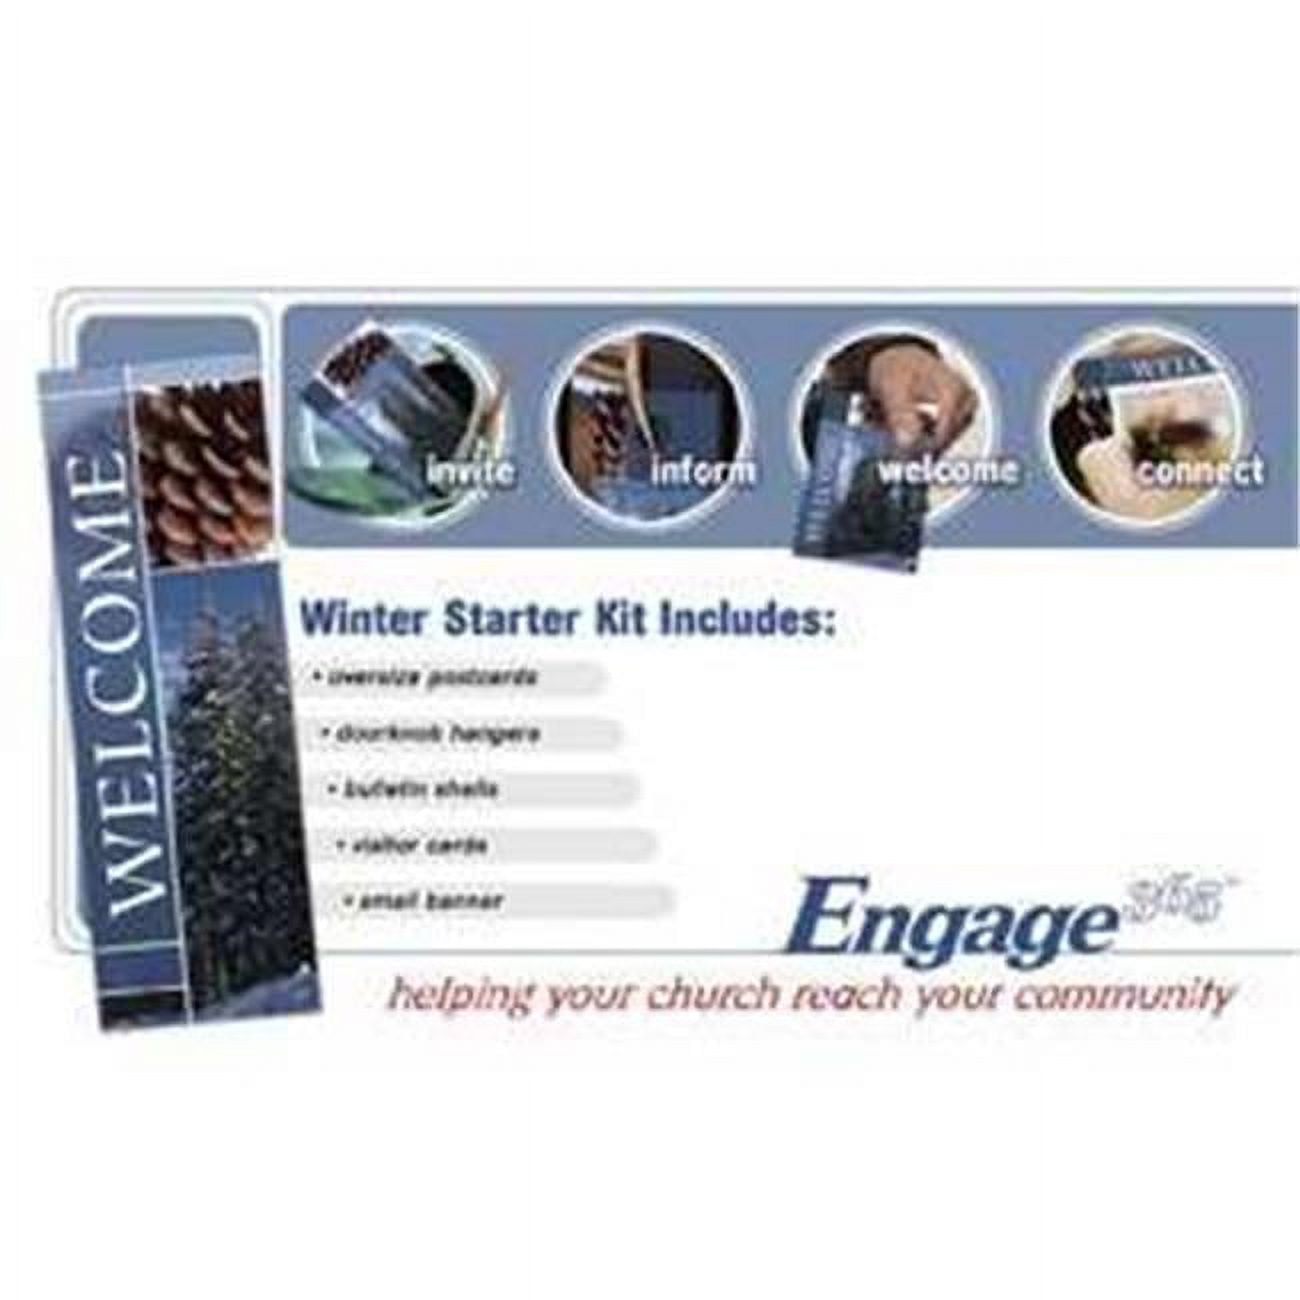 Picture of B & H Publishing Group 469532 Starter Kit-Engage & Winter - Out of Print